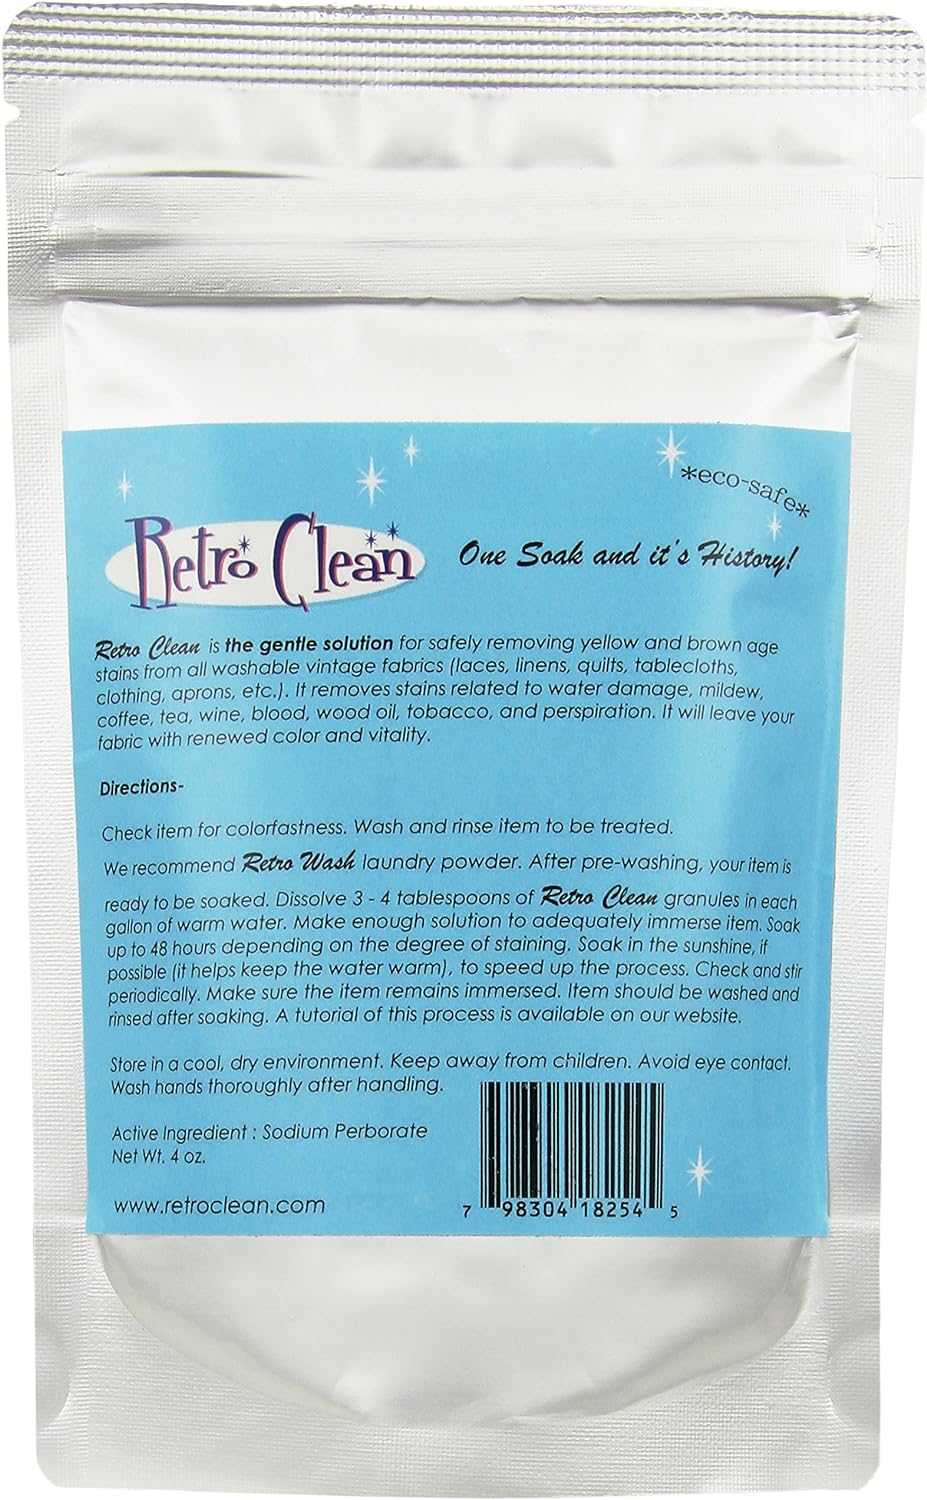 Retro Clean Cleaning Solution, 4 Ounce (Pack of 1) : Health & Household